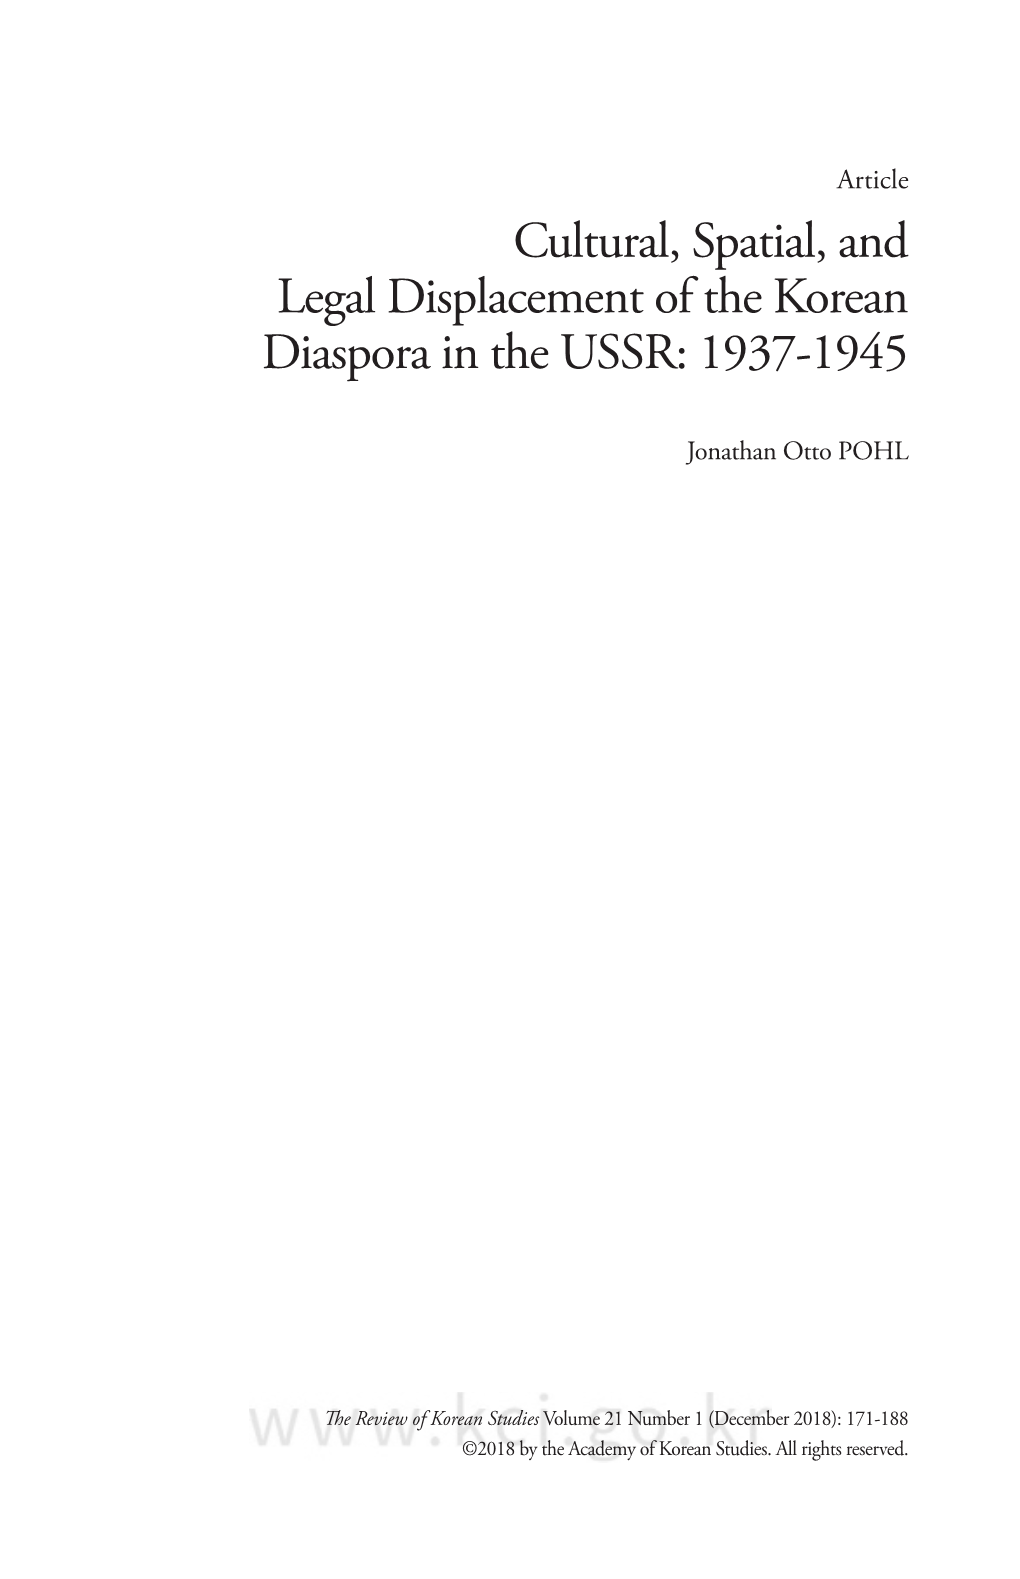 Cultural, Spatial, and Legal Displacement of the Korean Diaspora in the USSR: 1937-1945